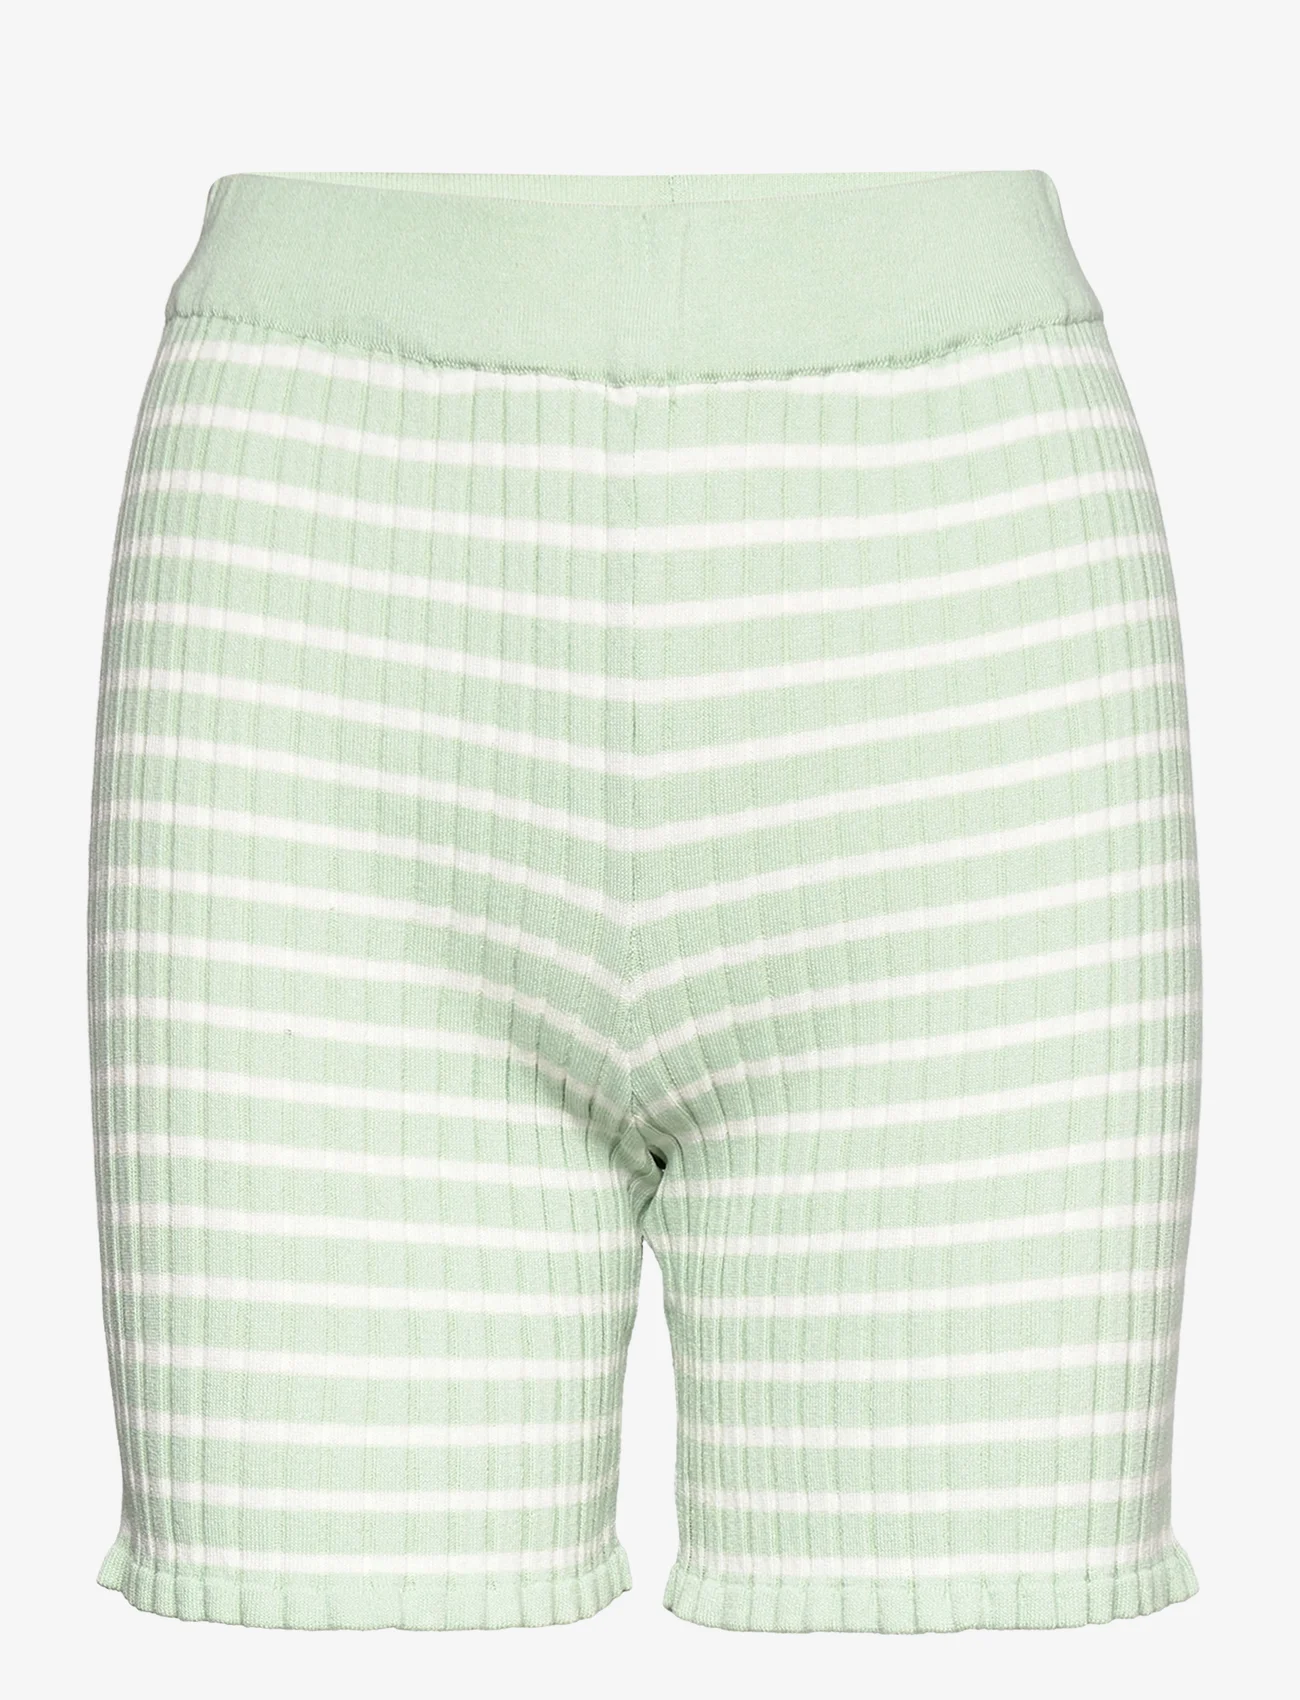 A-View - Sira shorts - ikdienas šorti - pale mint/off white - 0